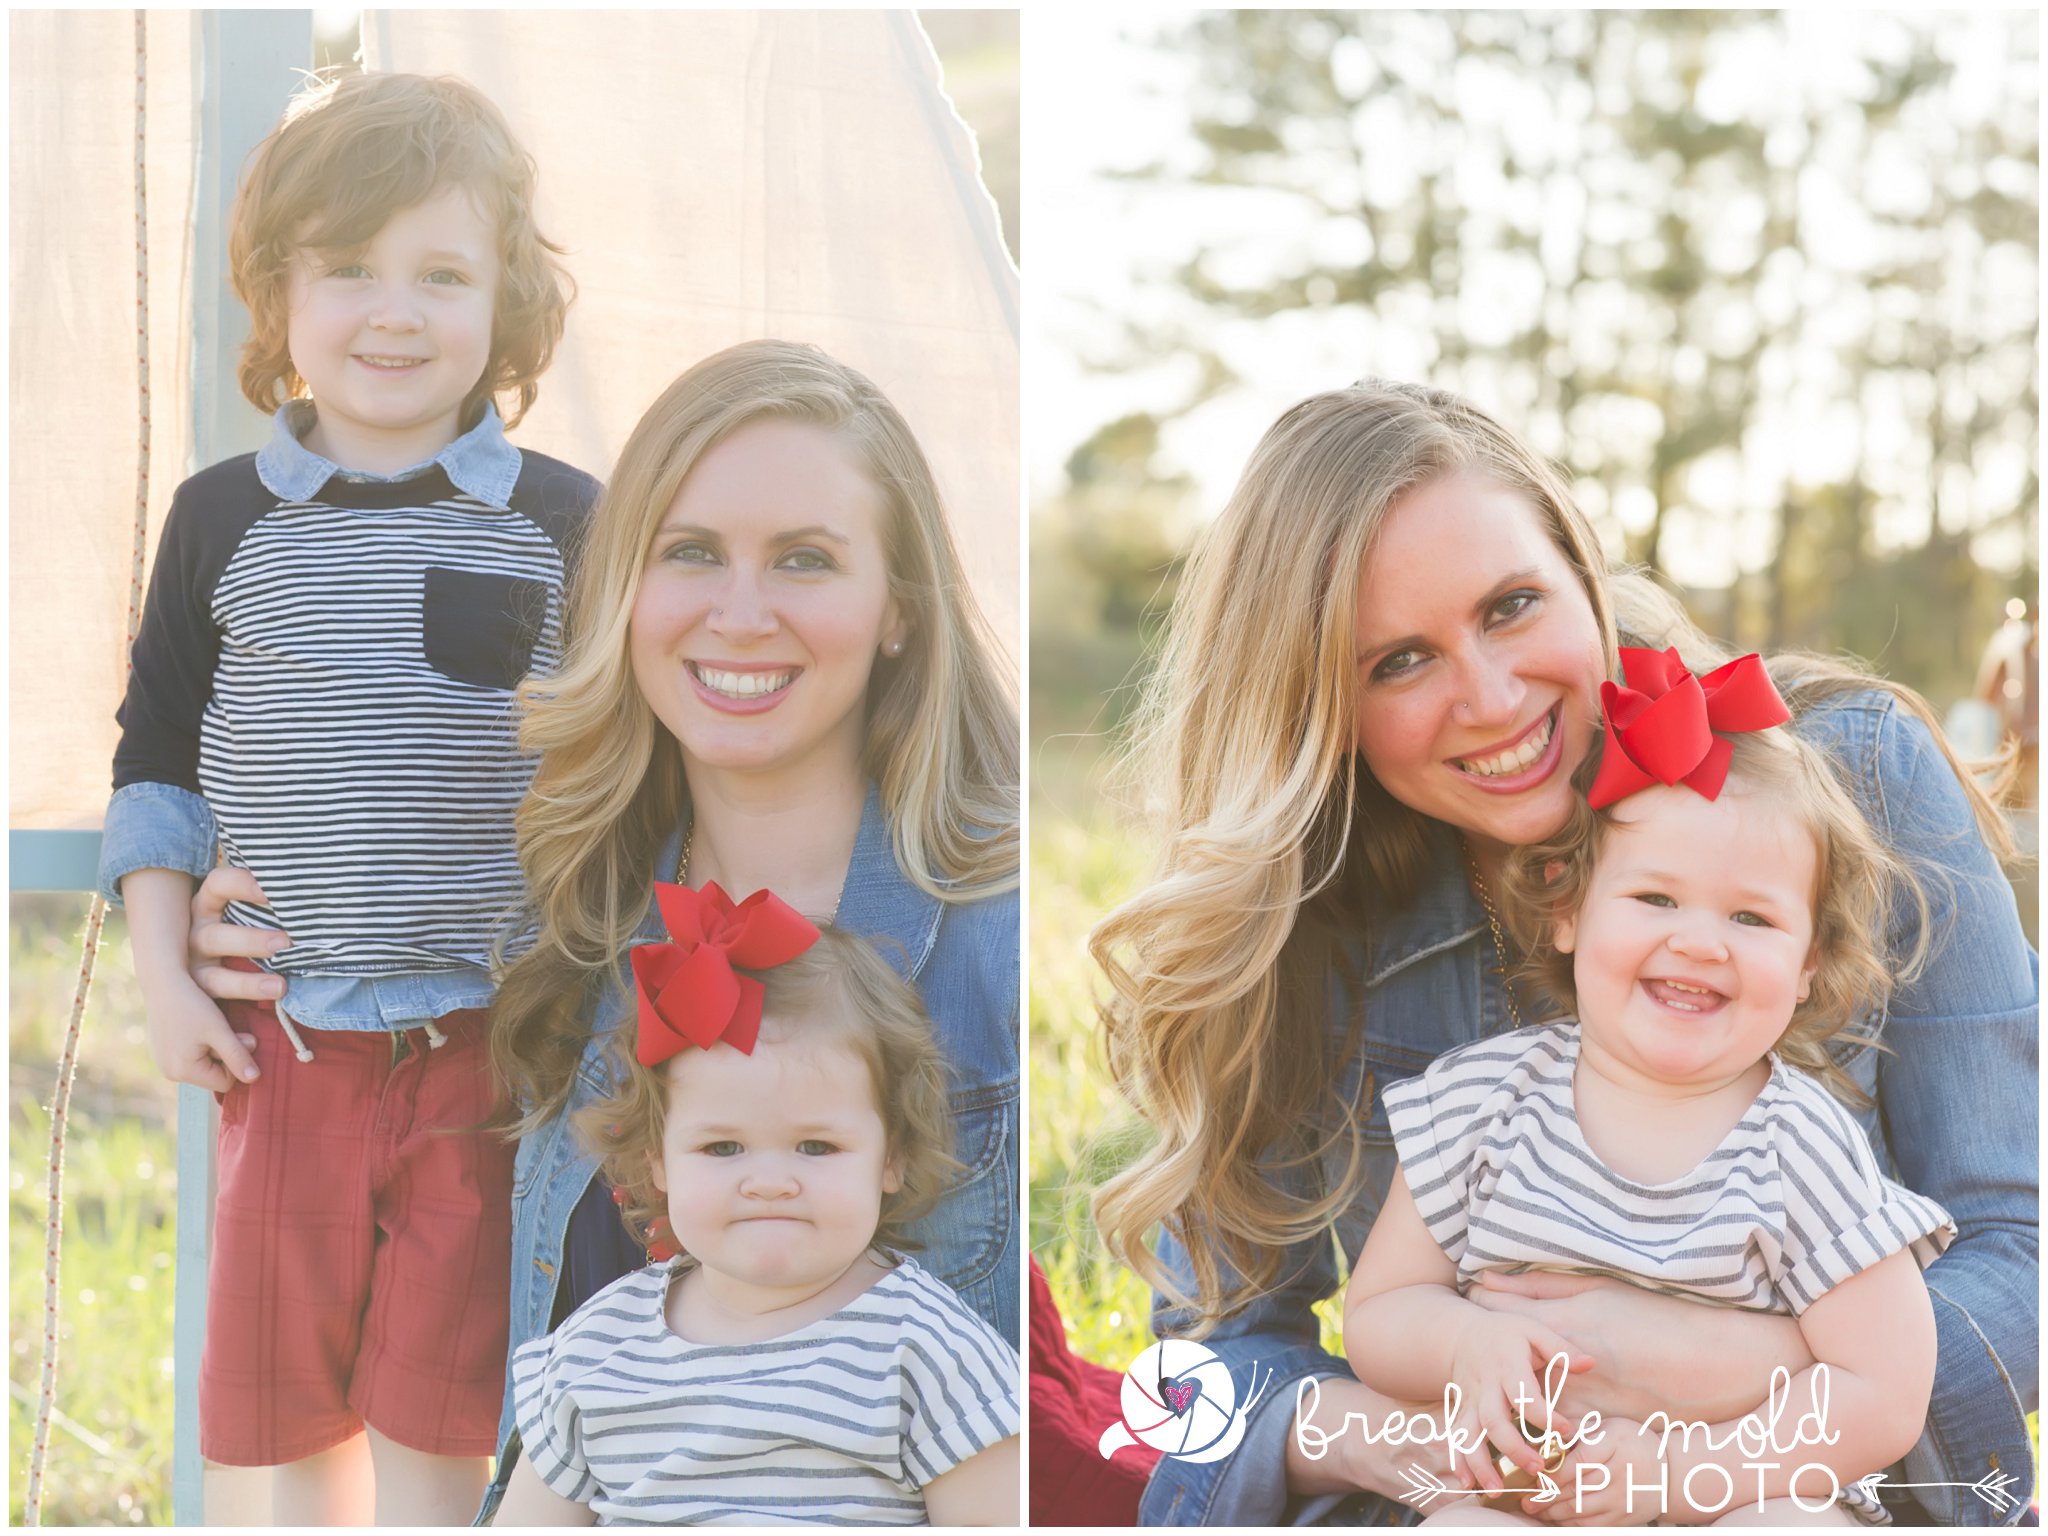 break-the-mold-photo-nautical-themed-mini-sessions-knoxville_3895.jpg